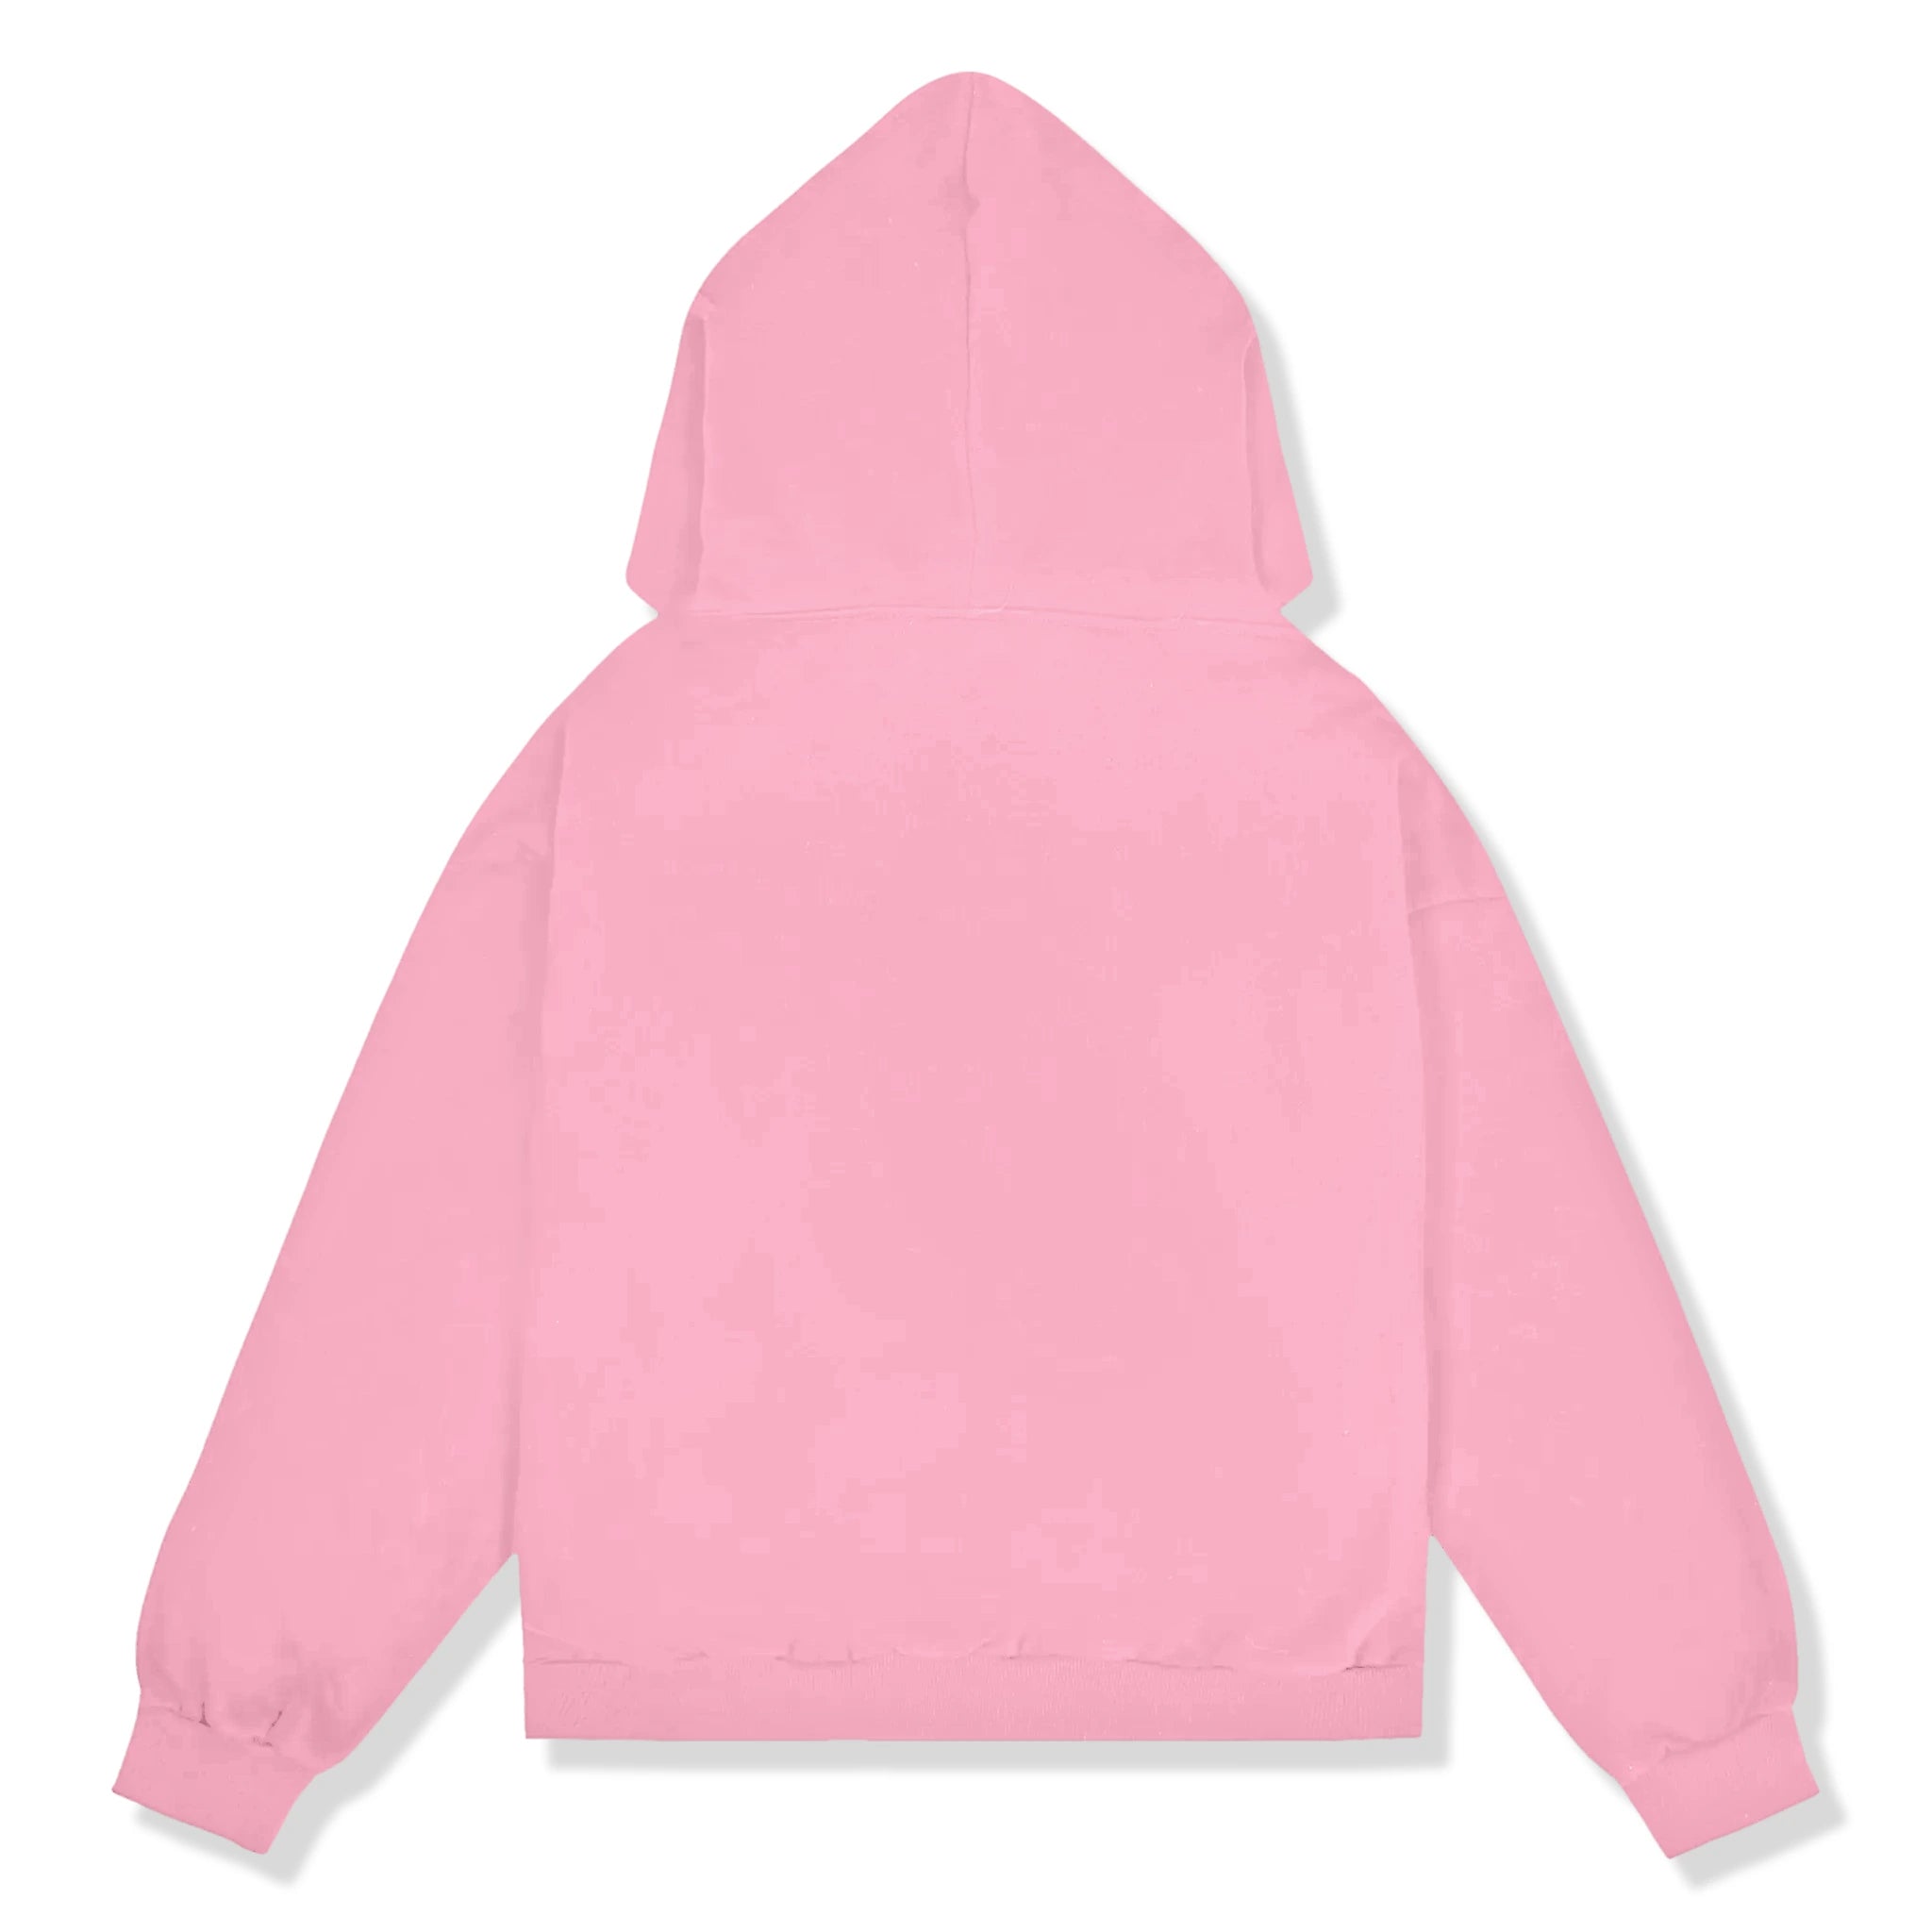 Back view of Carsicko London Pink Hoodie